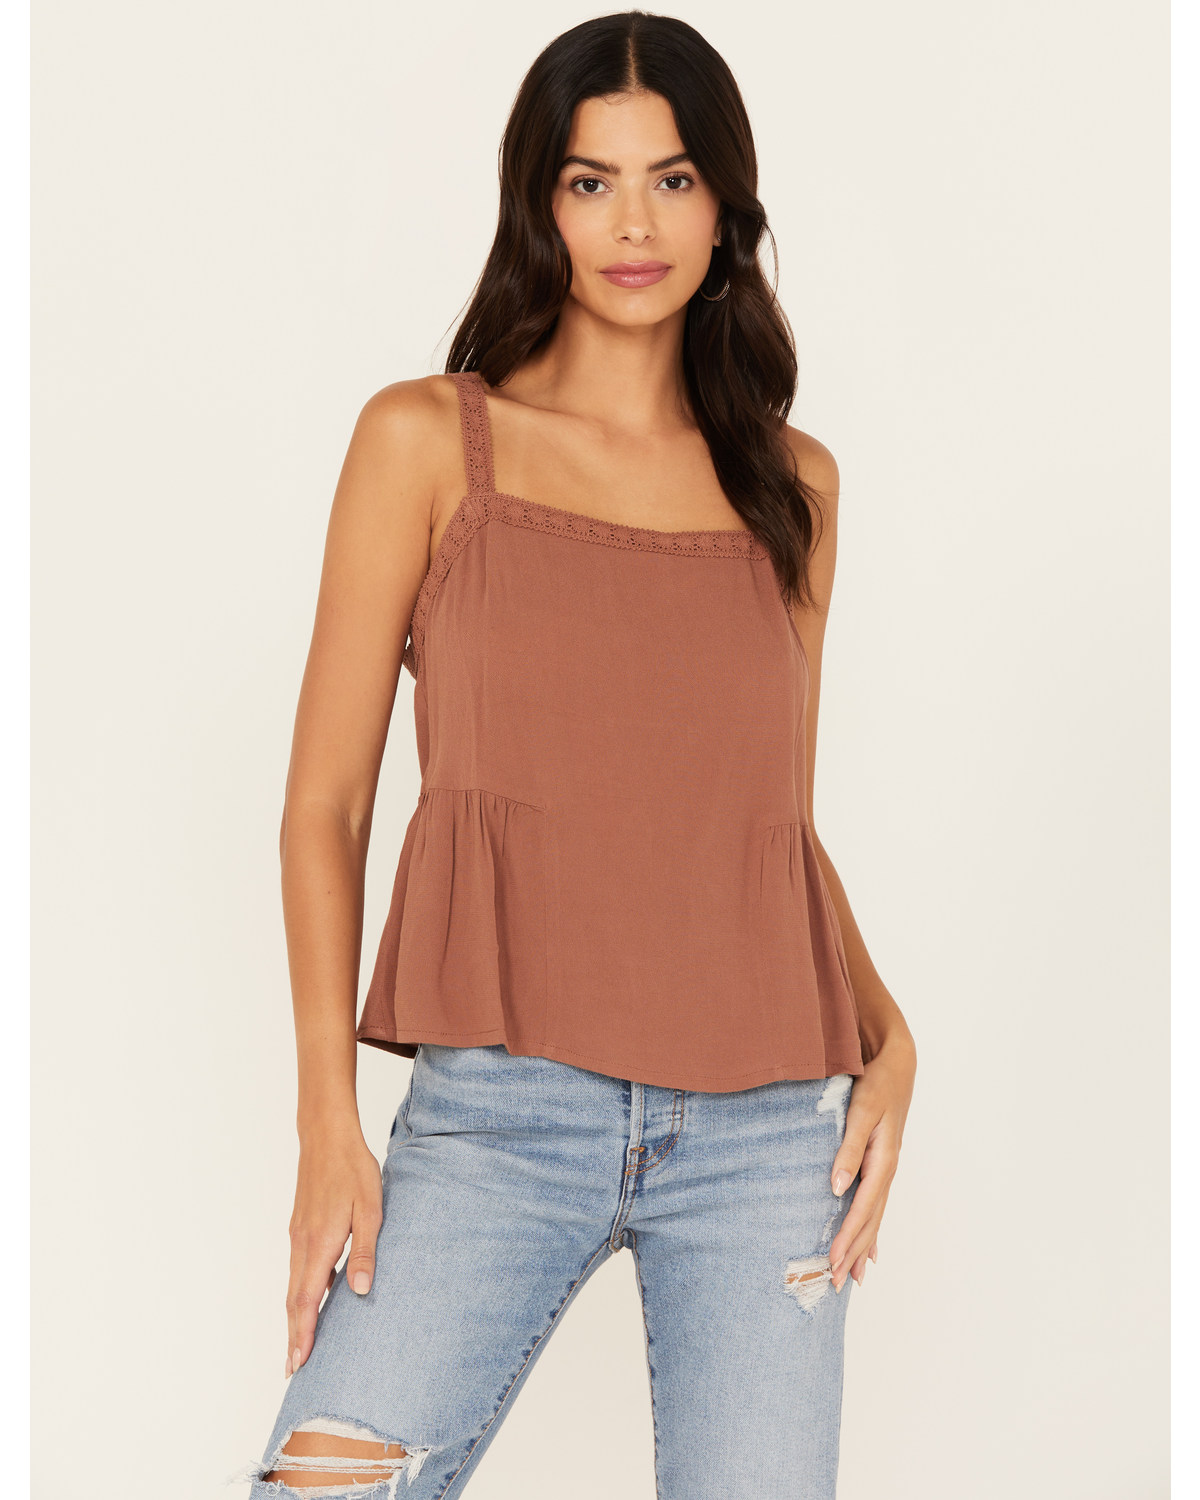 Cleo + Wolf Women's Cropped Strappy Peplum Top